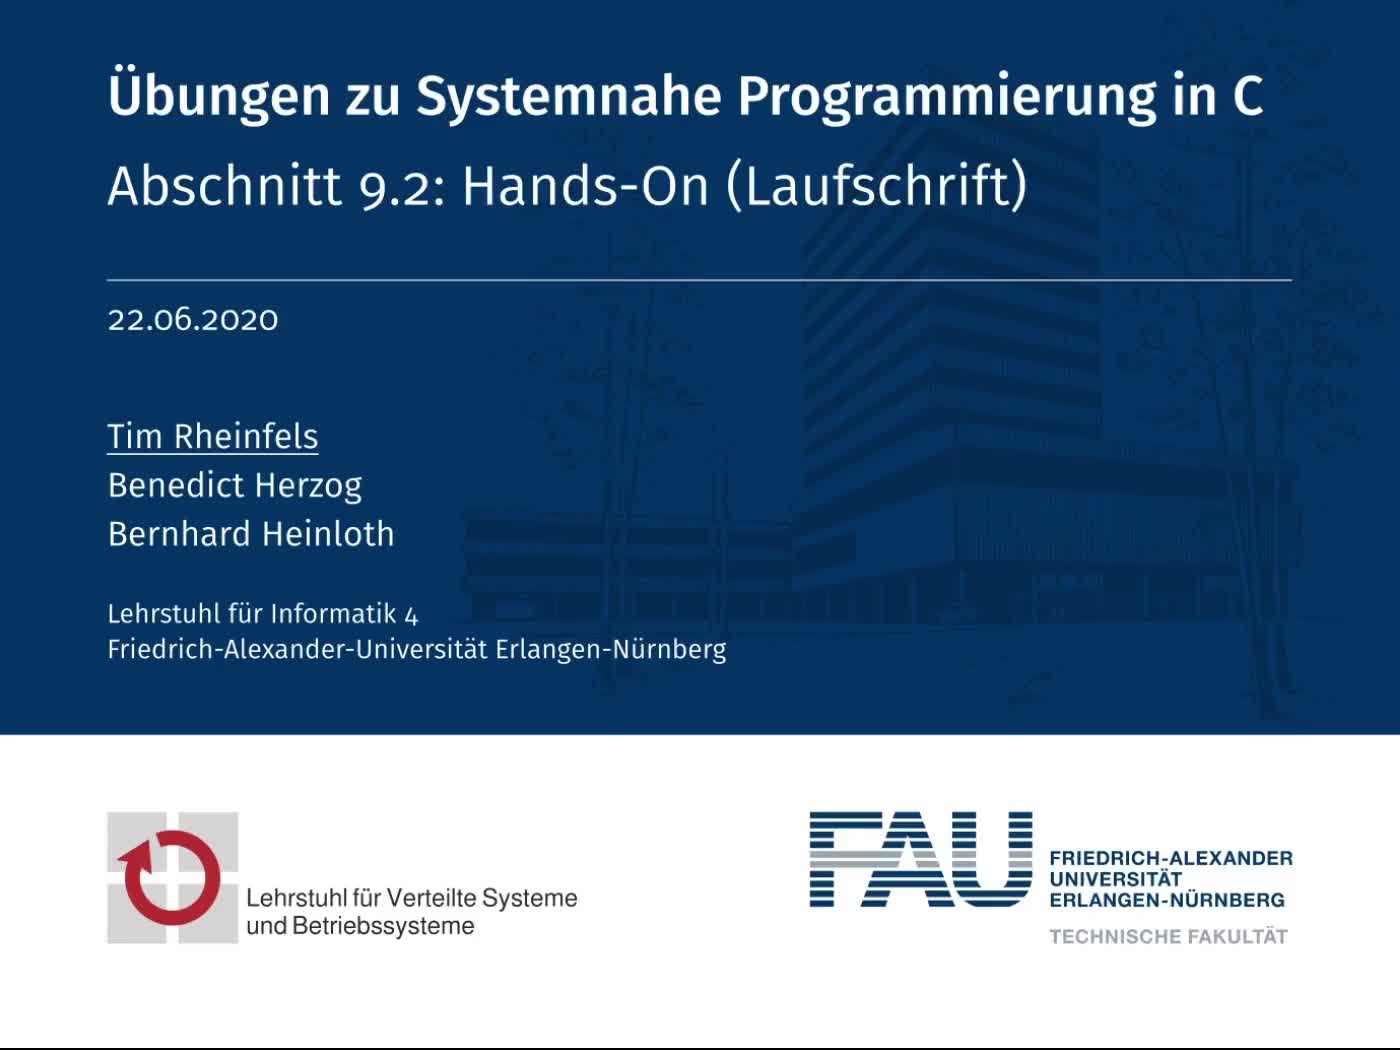 09.2: Hands-On (Laufschrift) preview image